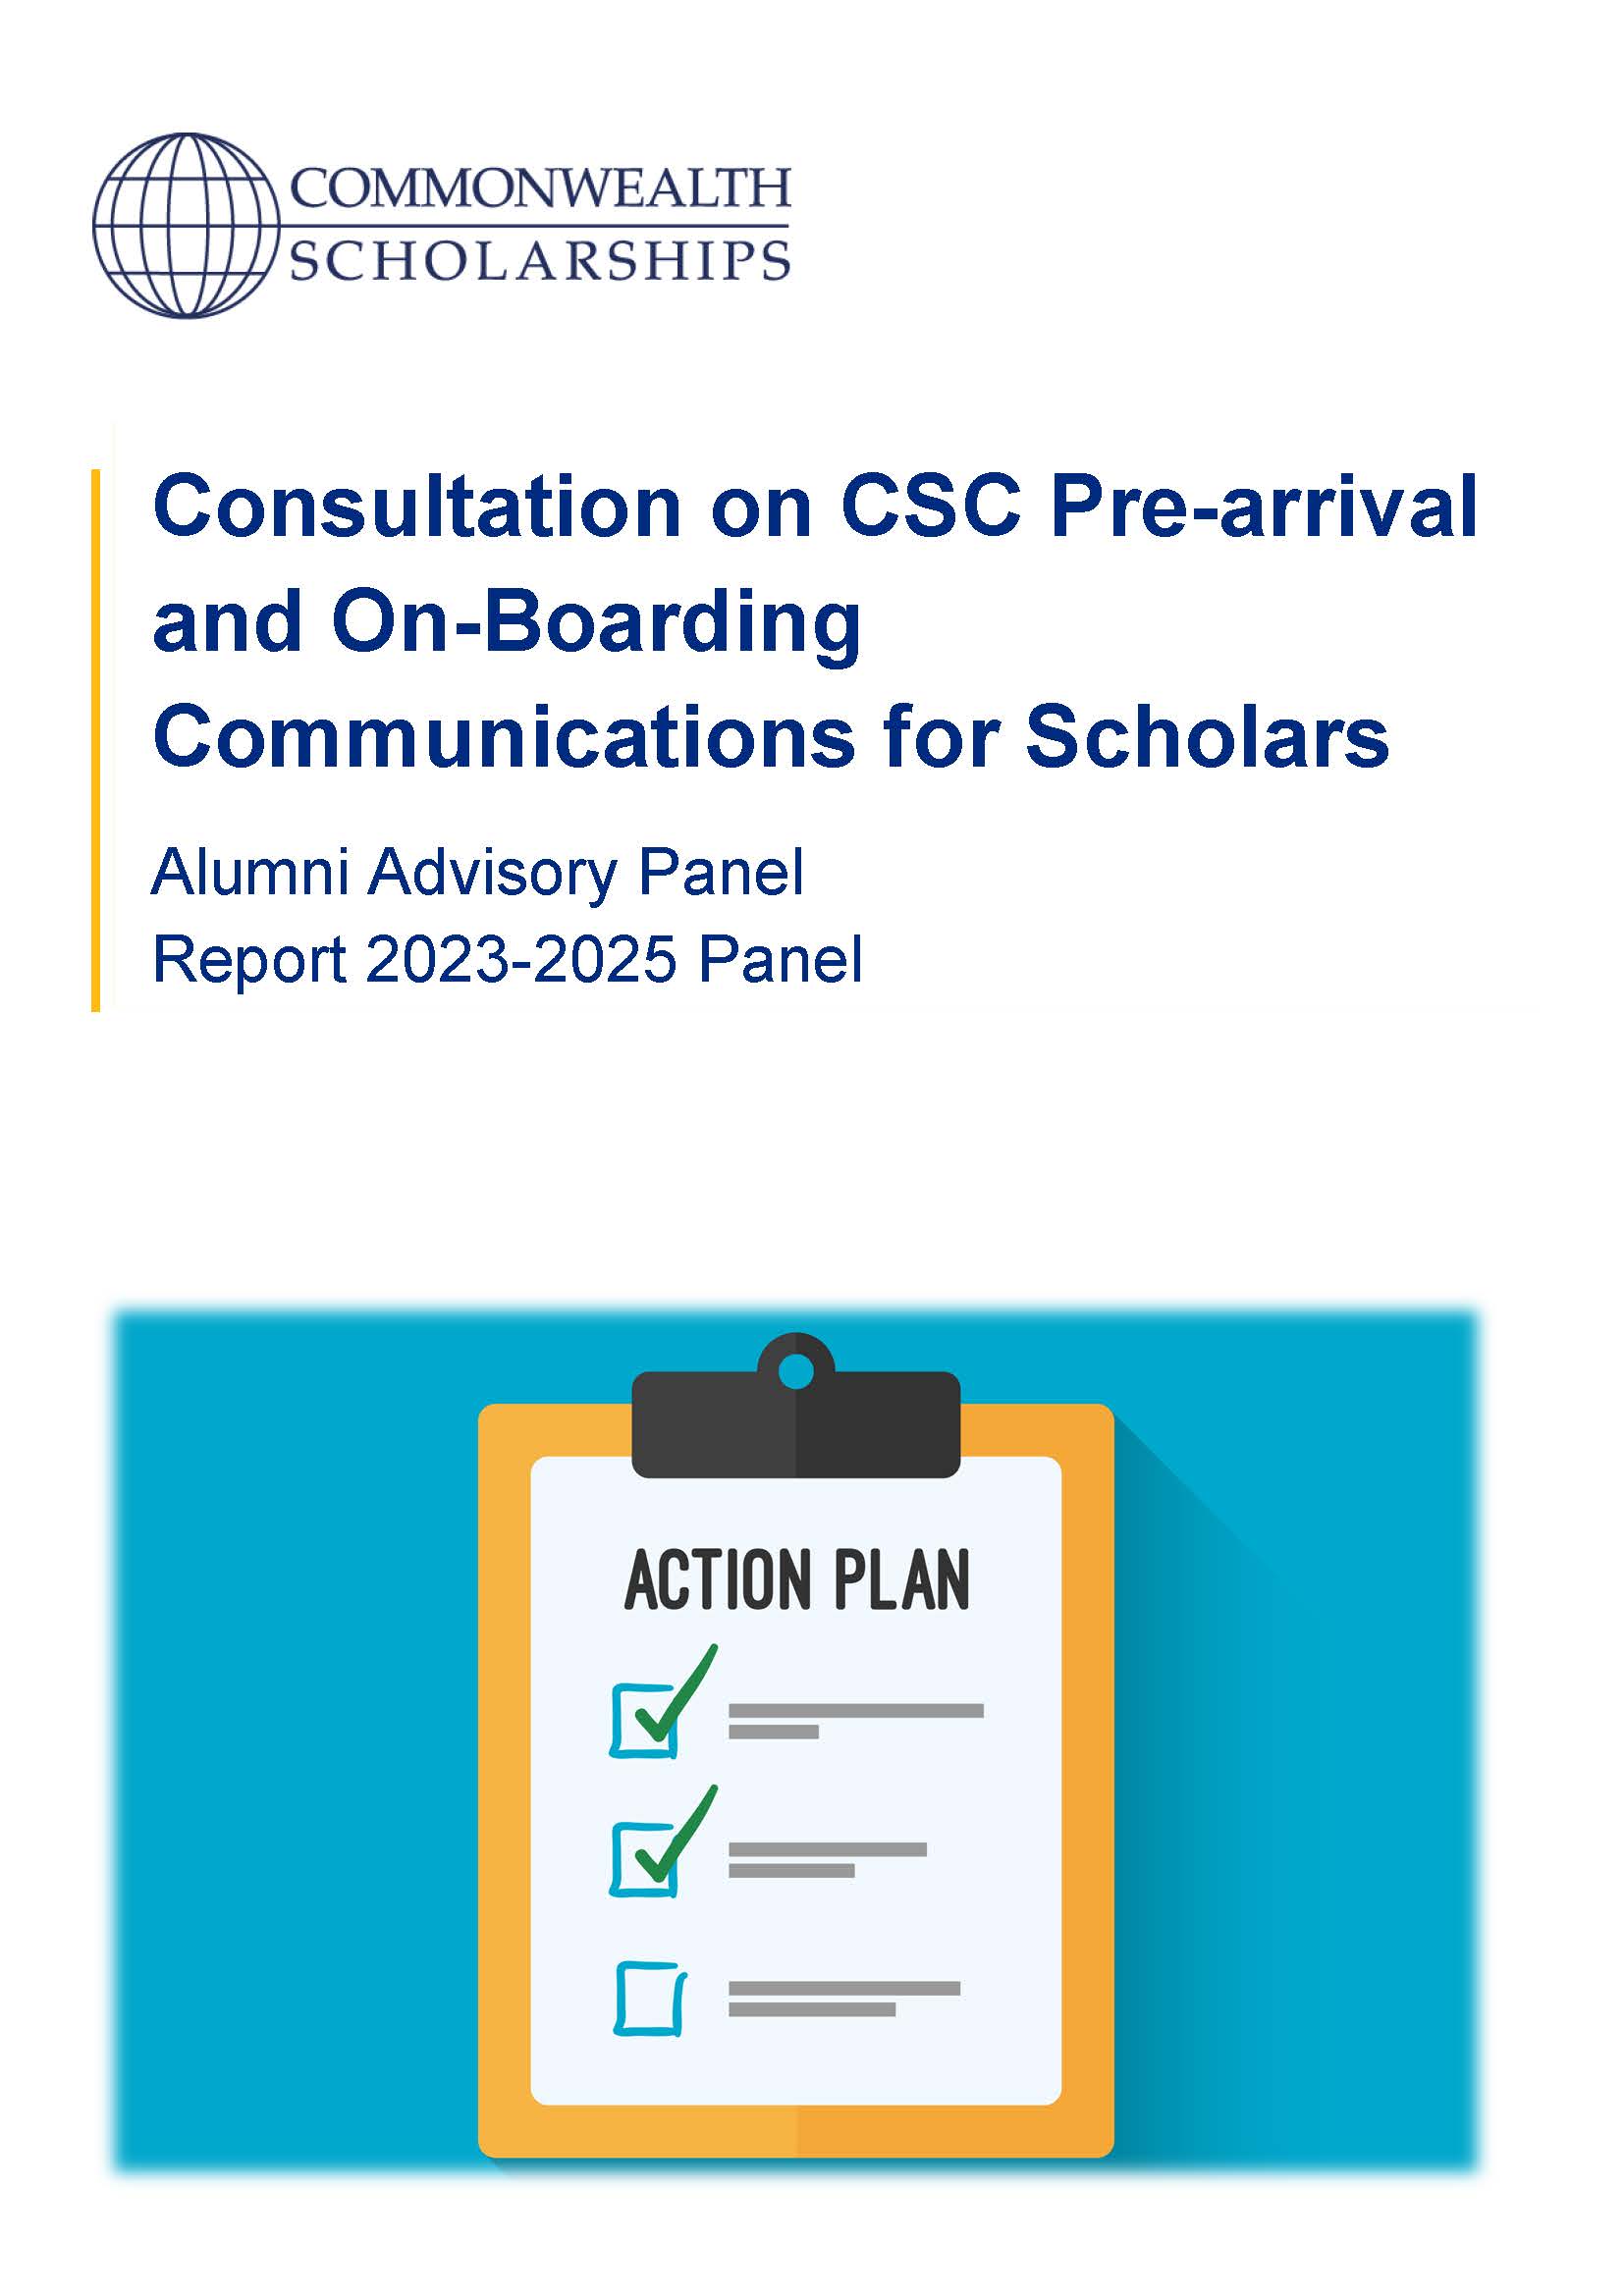 Front page of Alumni Advisory Panel report